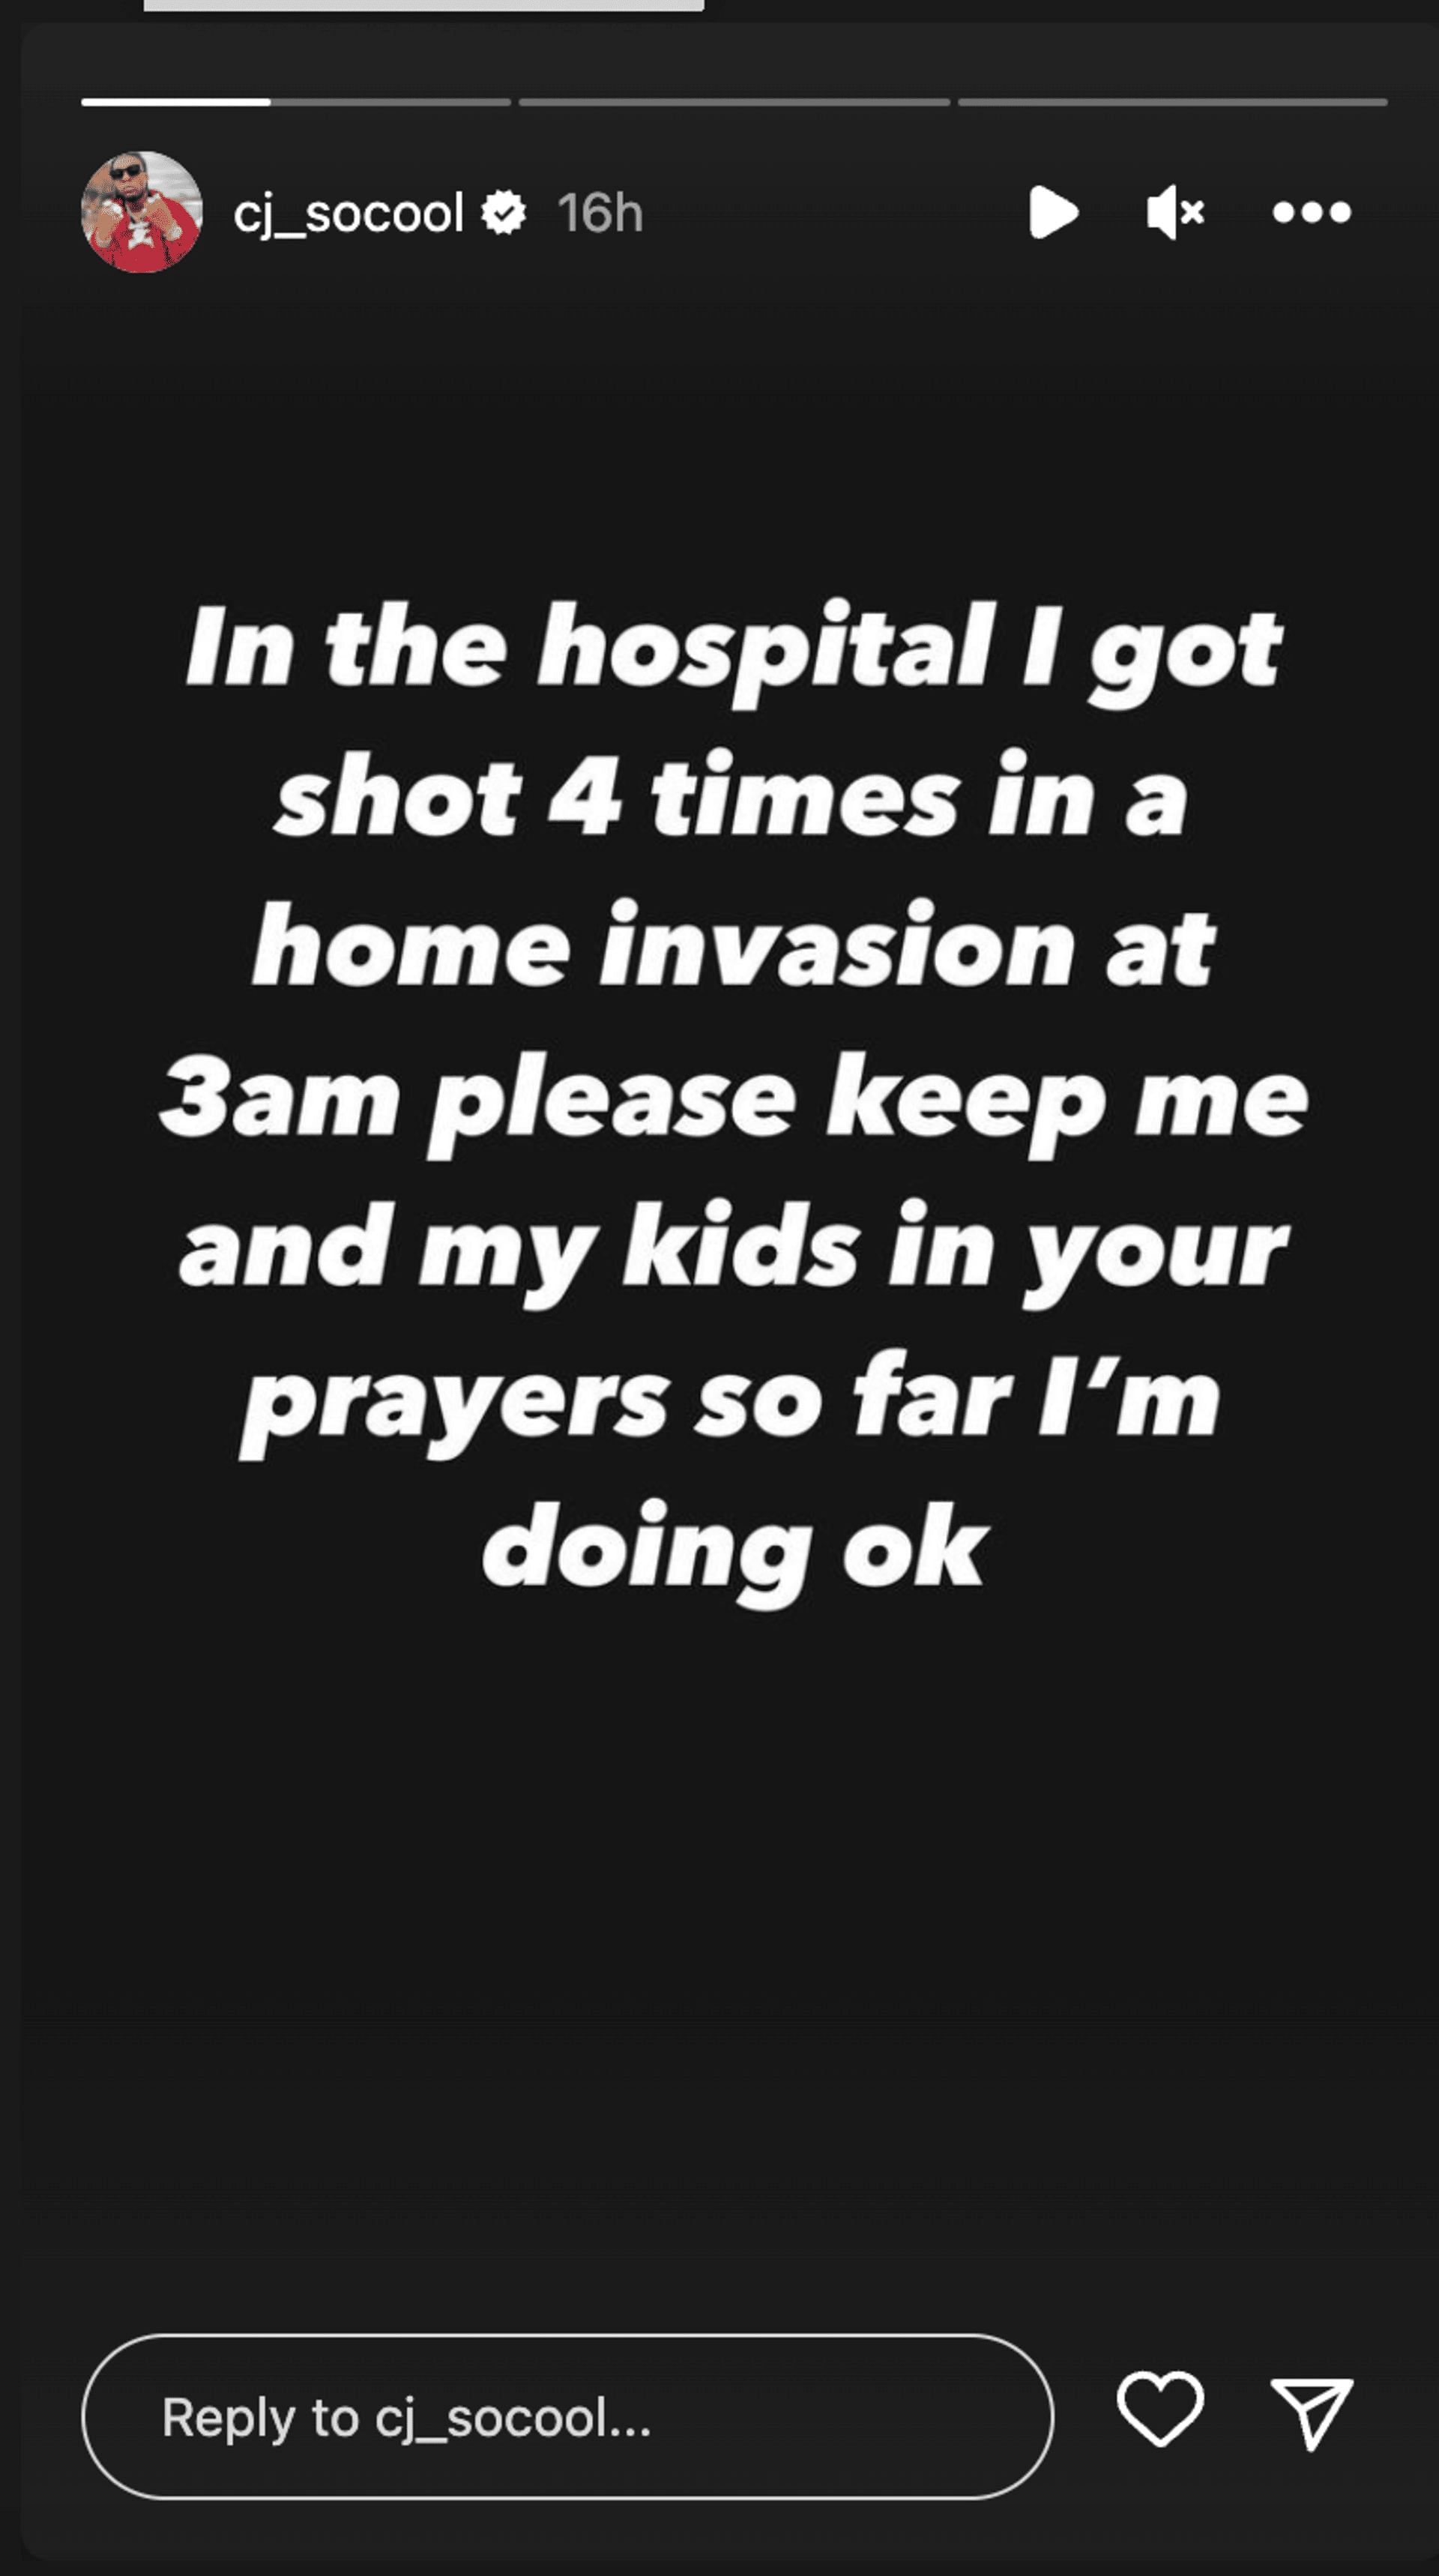 CJ So Cool informed his followers about getting shot multiple times through the Instagram story. (Image via Instagram)